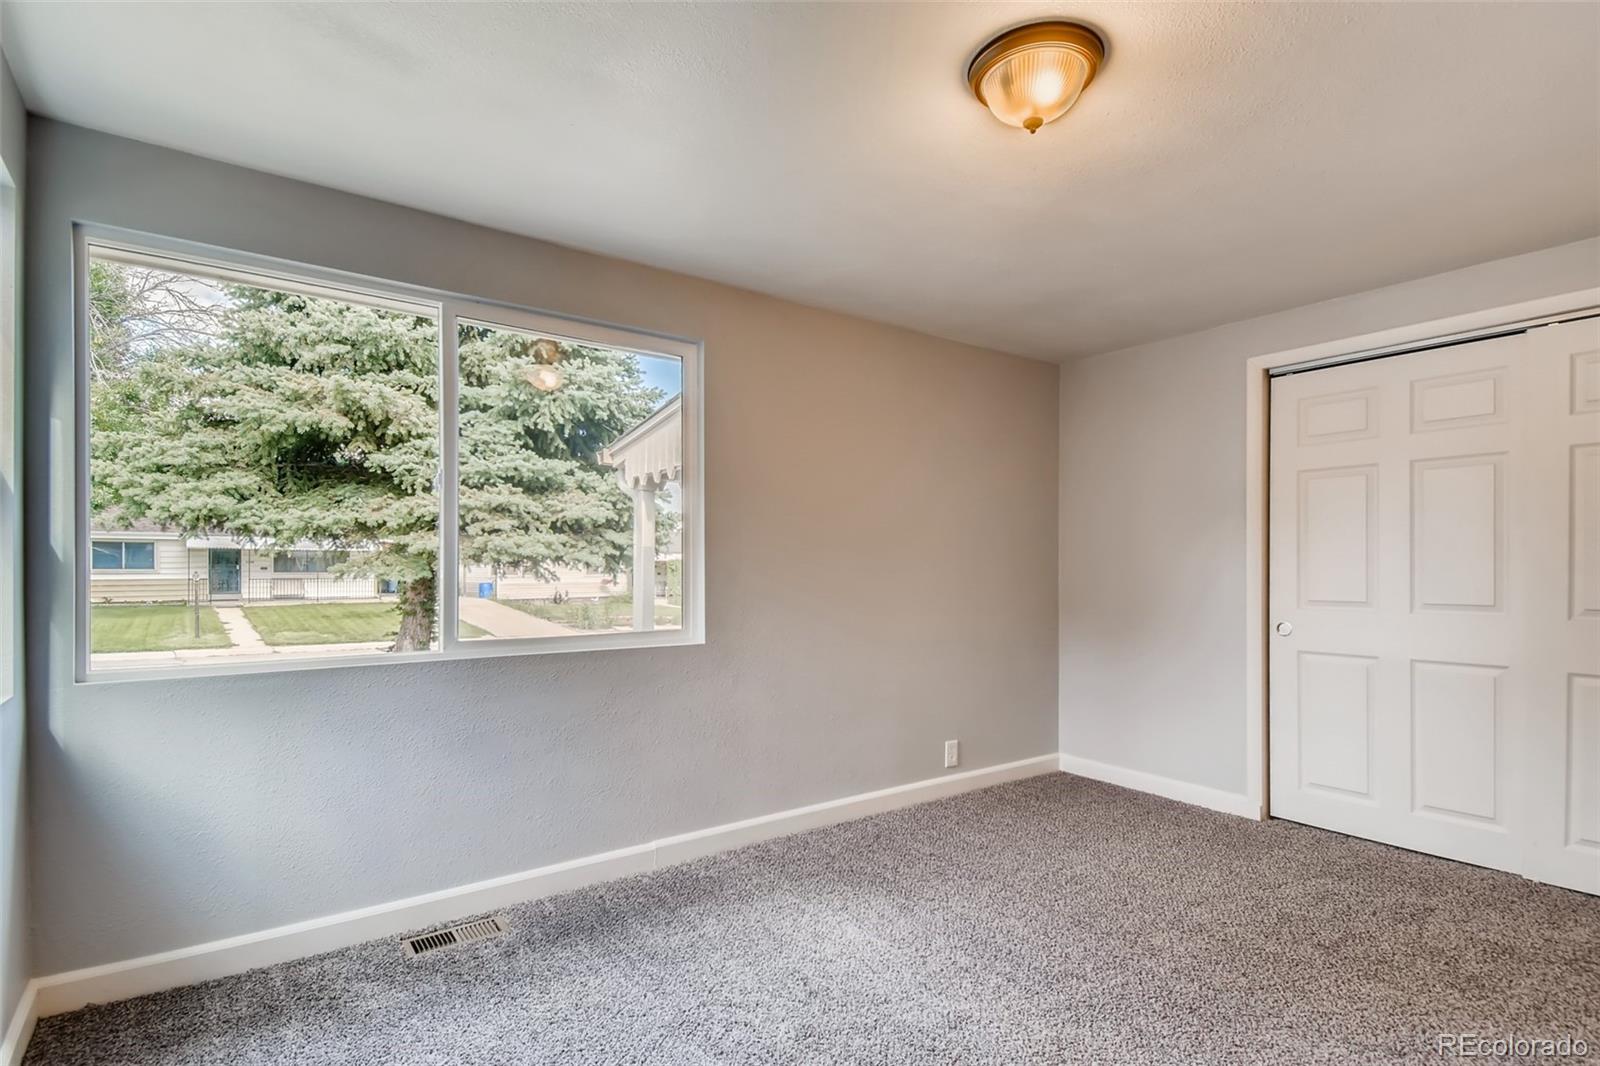 7361 Dale, Westminster, CO